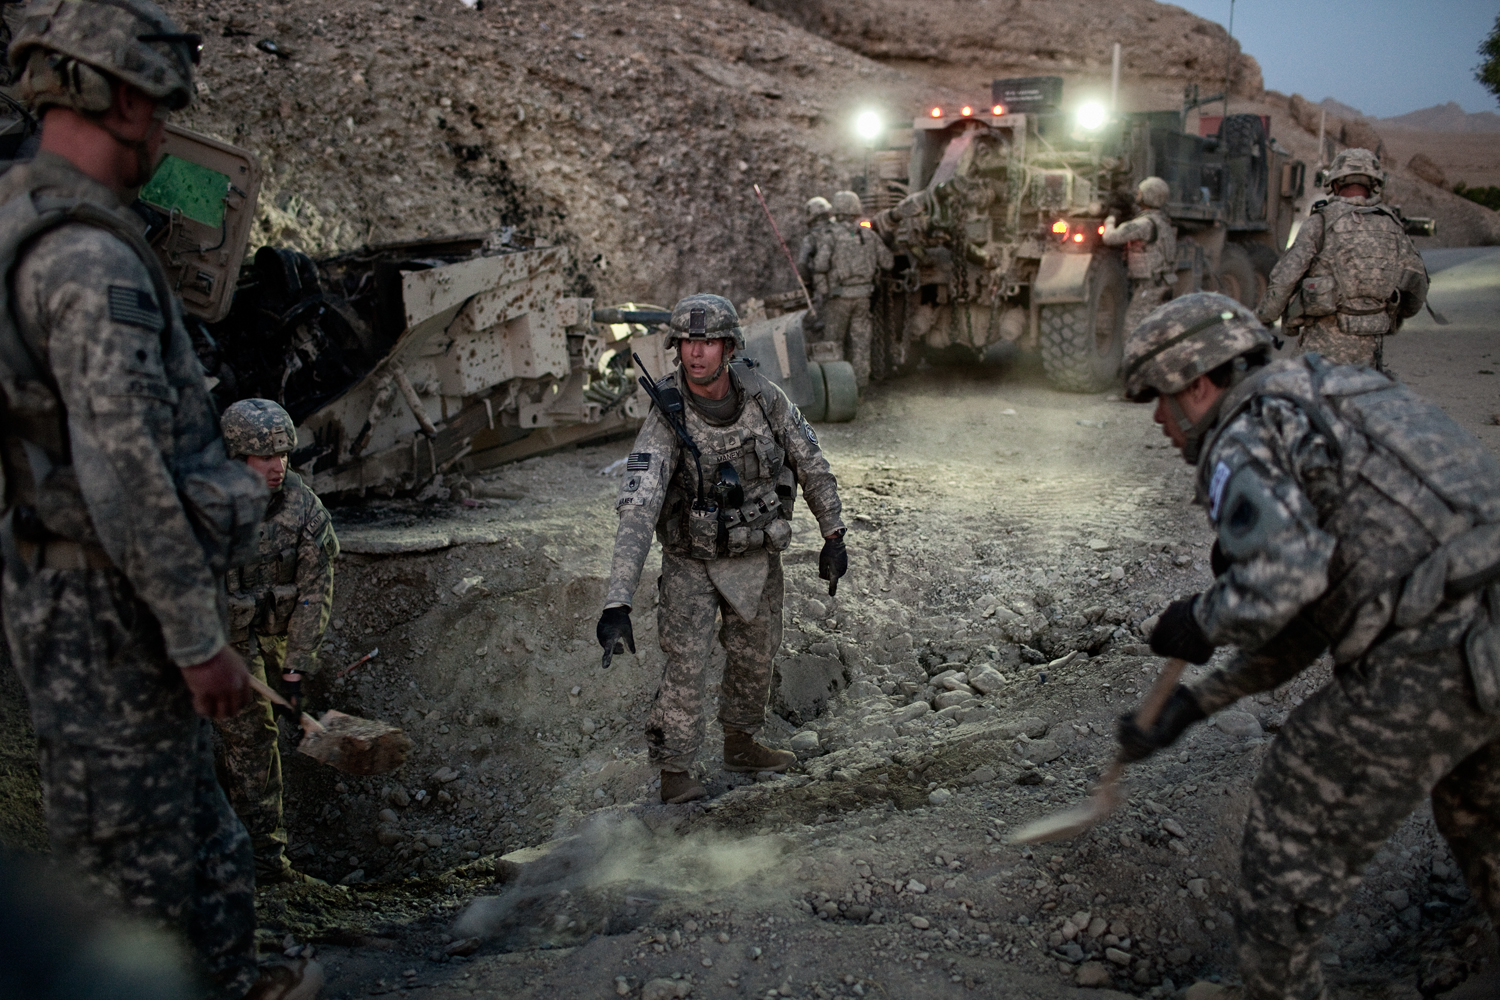  U.S. Army soldiers clear a road after an&nbsp;improvised explosive device attack on a vehicle in the Tangi Valley, Wardak Province, Afghanistan.    